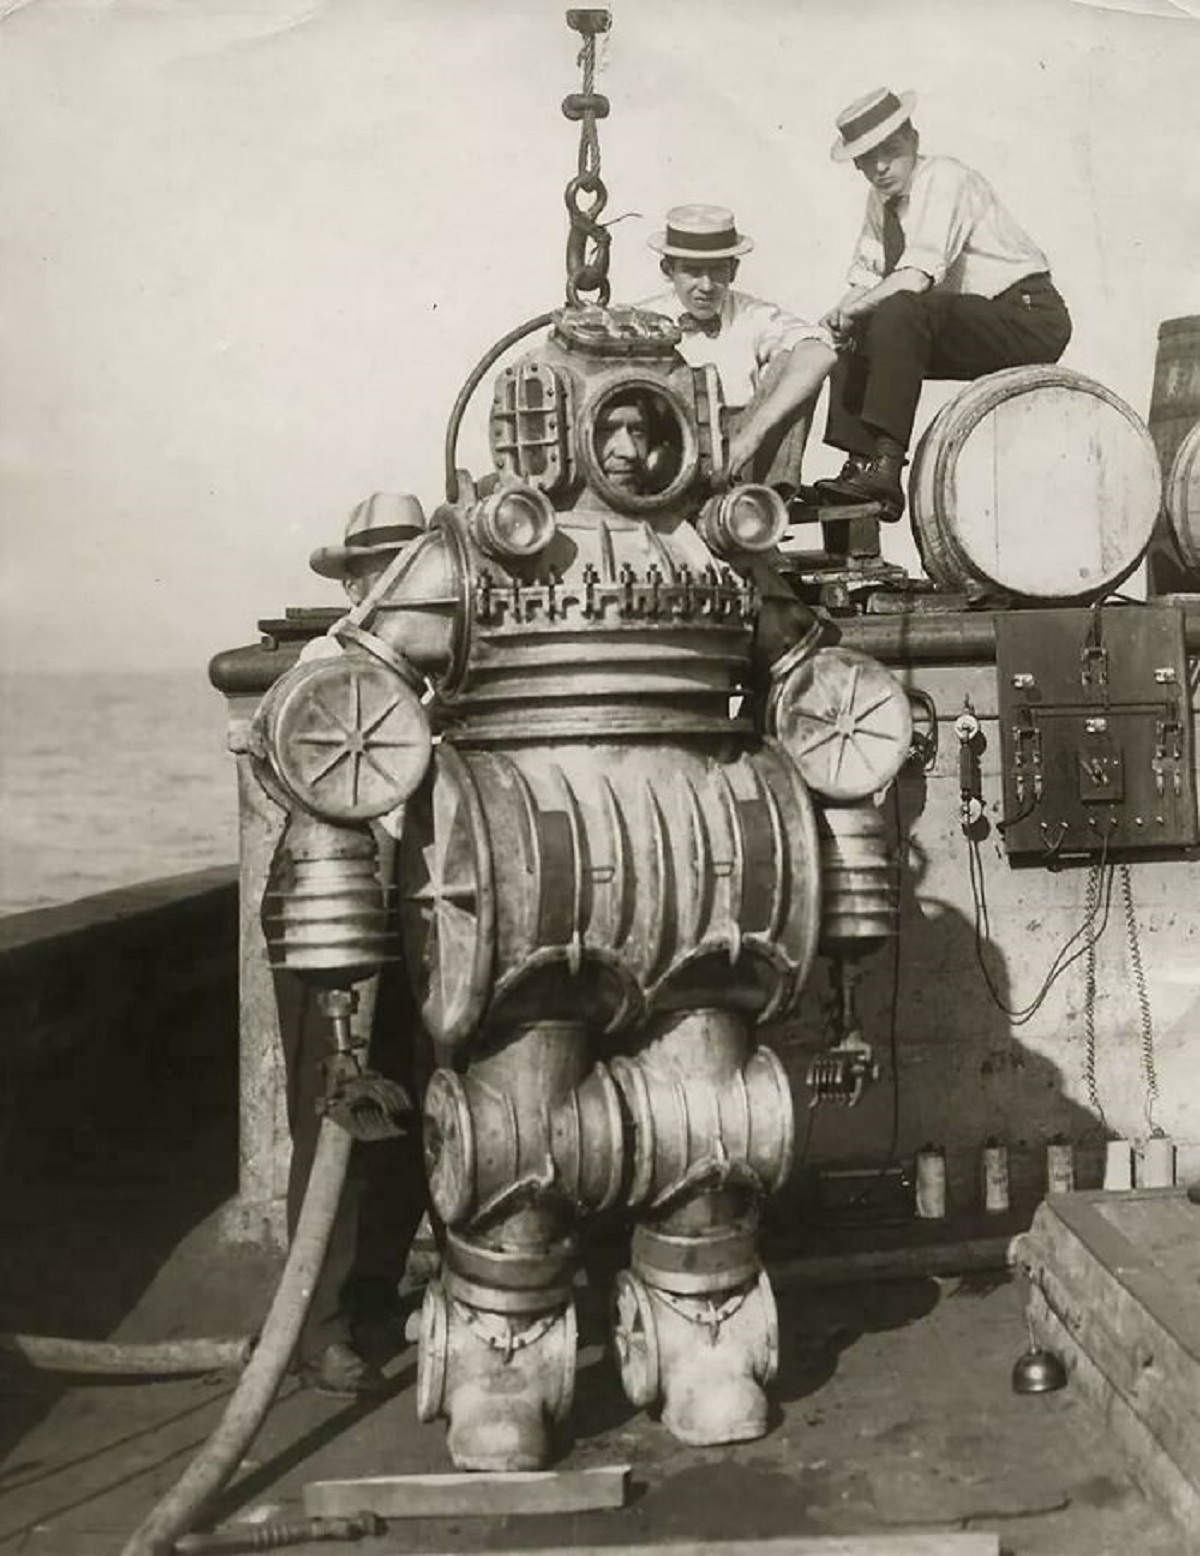 An Iron Man Of The Past In A Diving Suit. The Suit’s Name Was ‘Iron Man’ Too. It Had Electric Charging And Pressure Protection Systems. New York, 1907